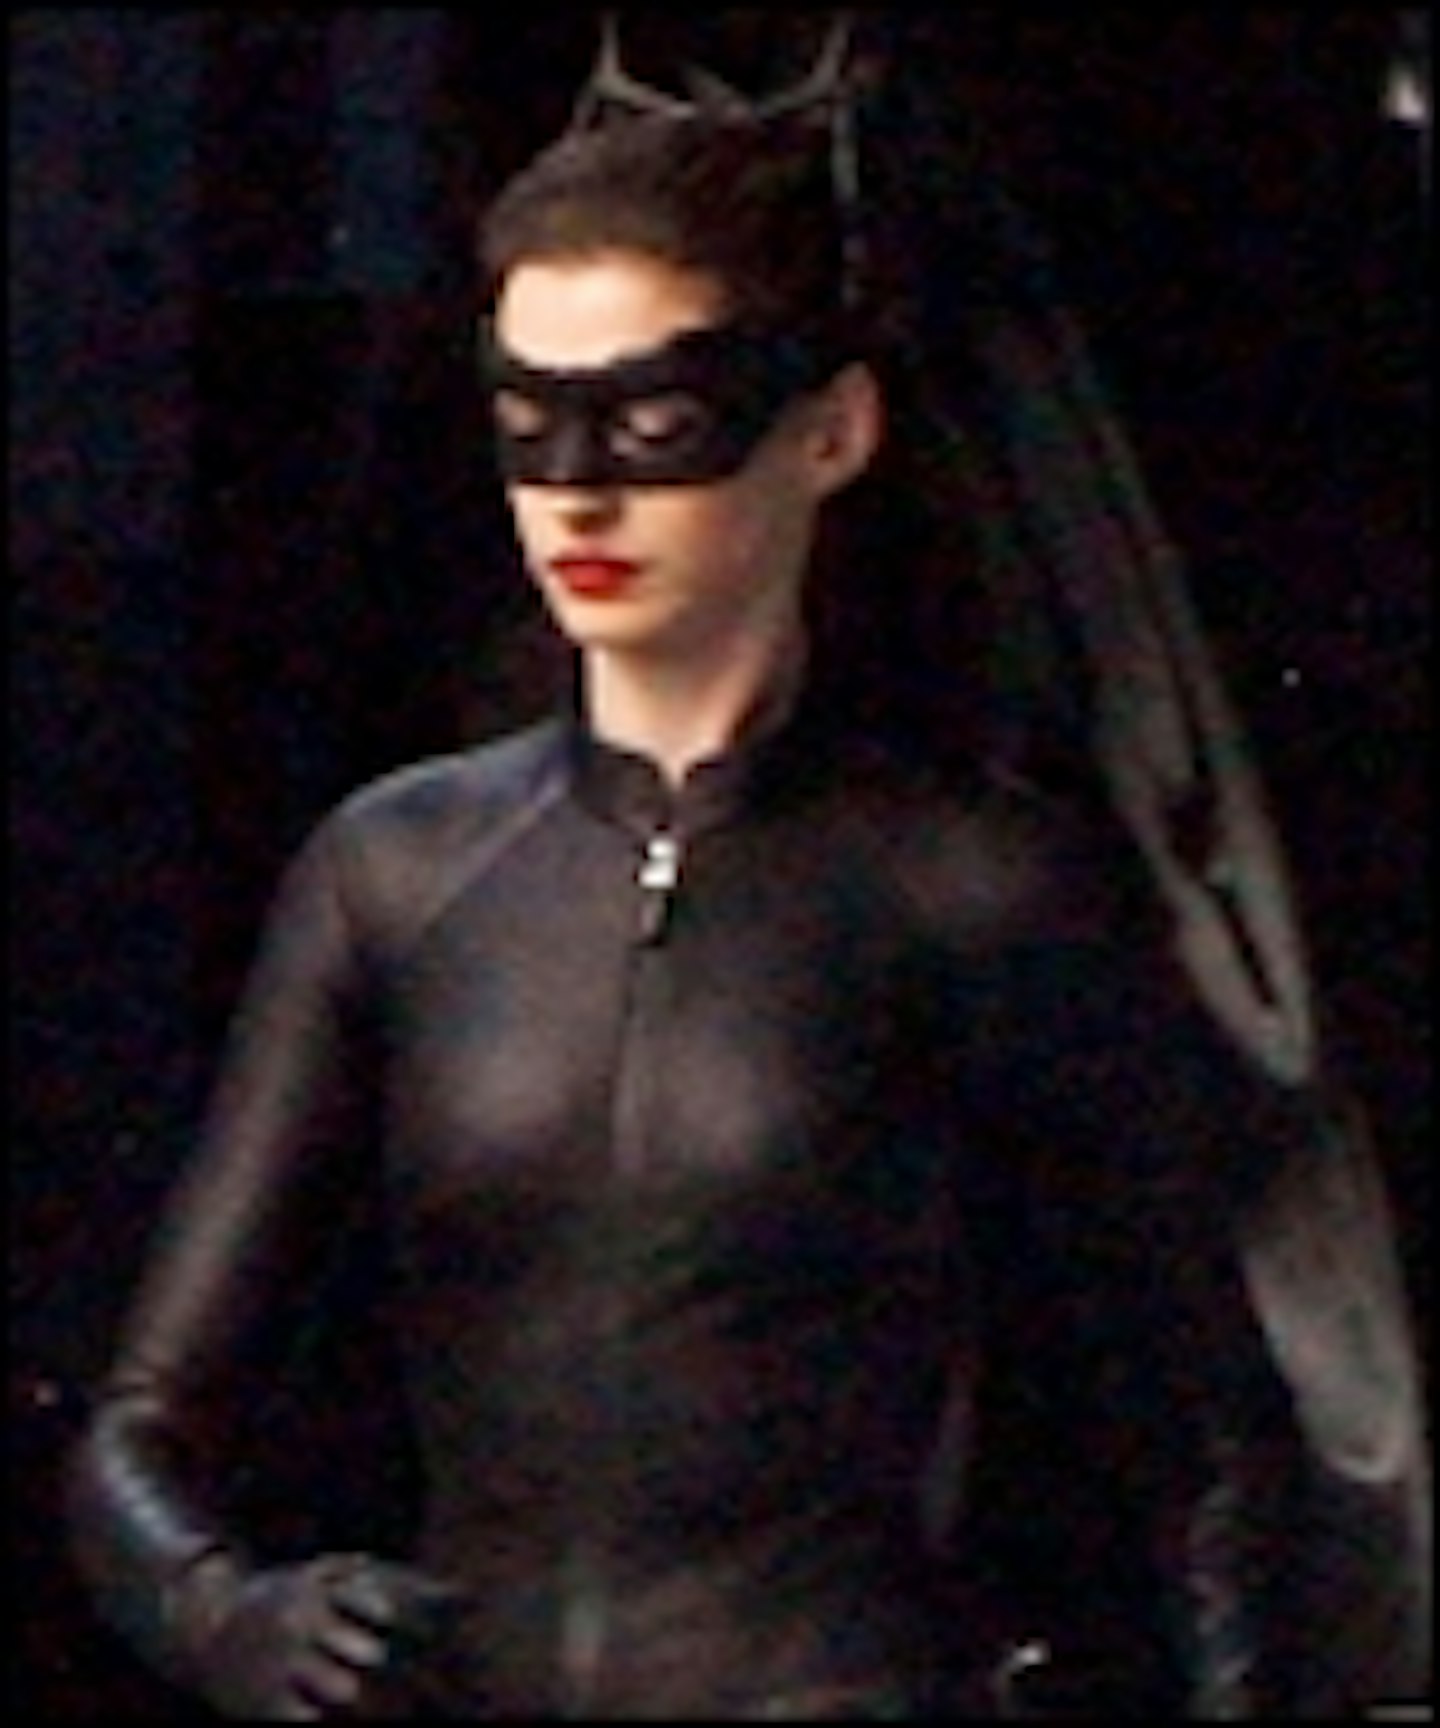 Hathaway's Full Catwoman Garb Revealed